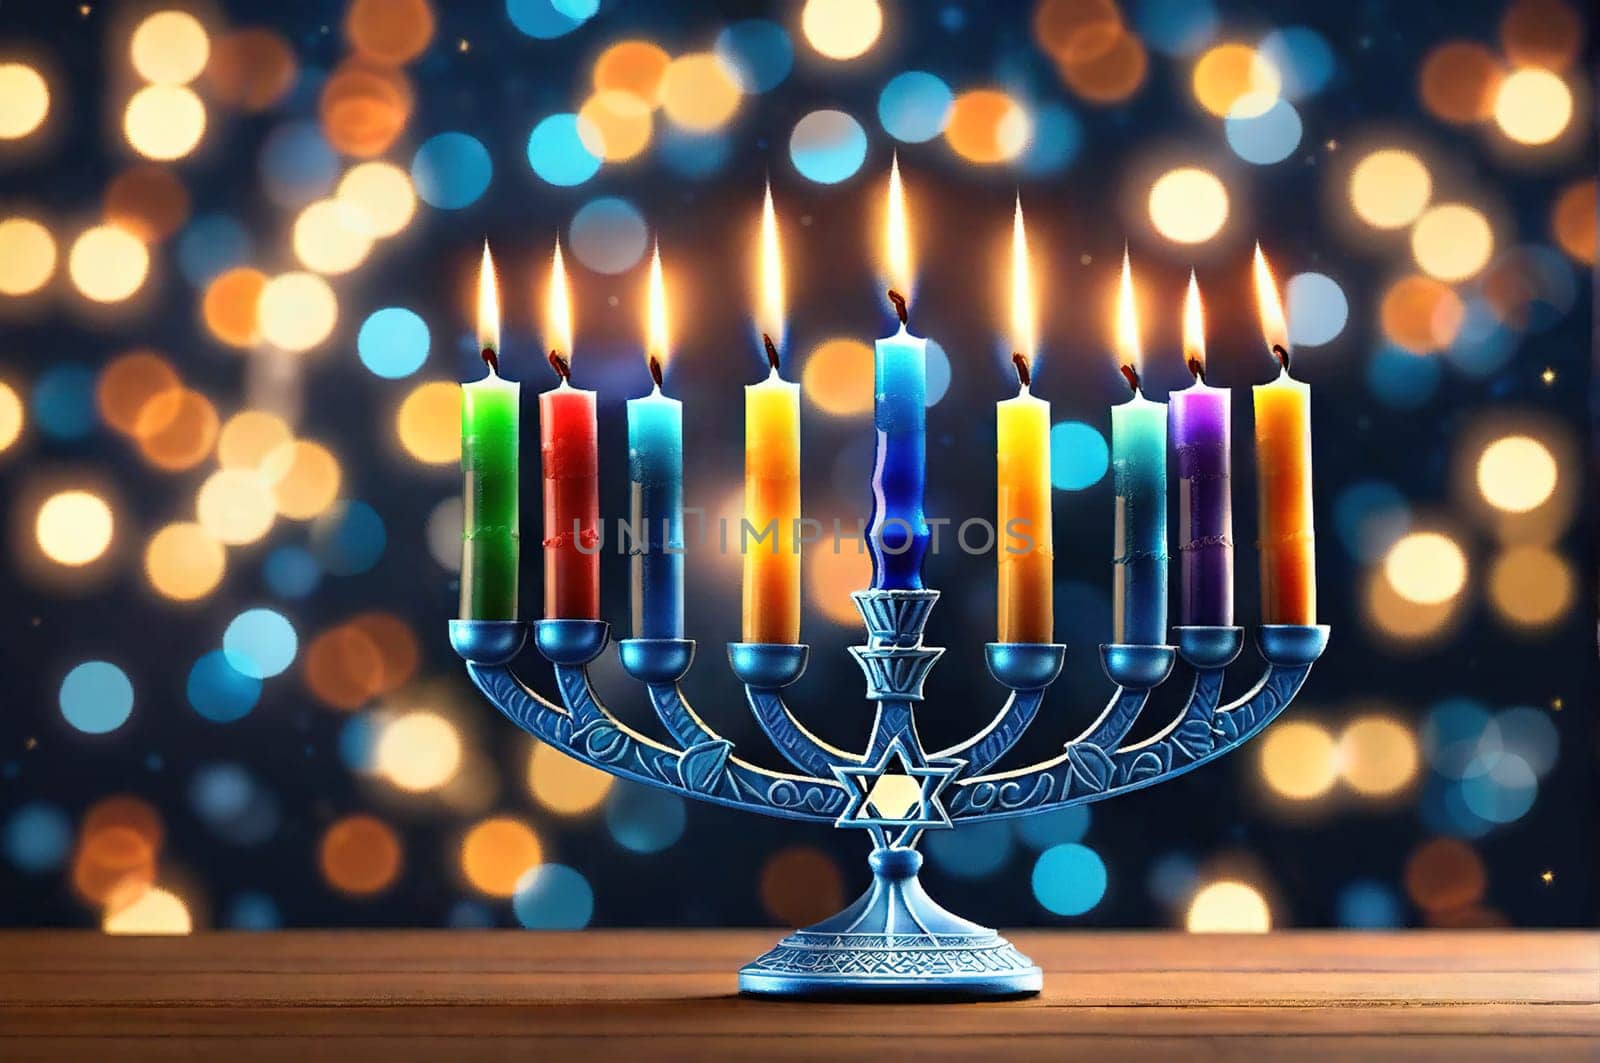 Hanukkah menorah with candles on table against blurry light, religious Jewish holiday